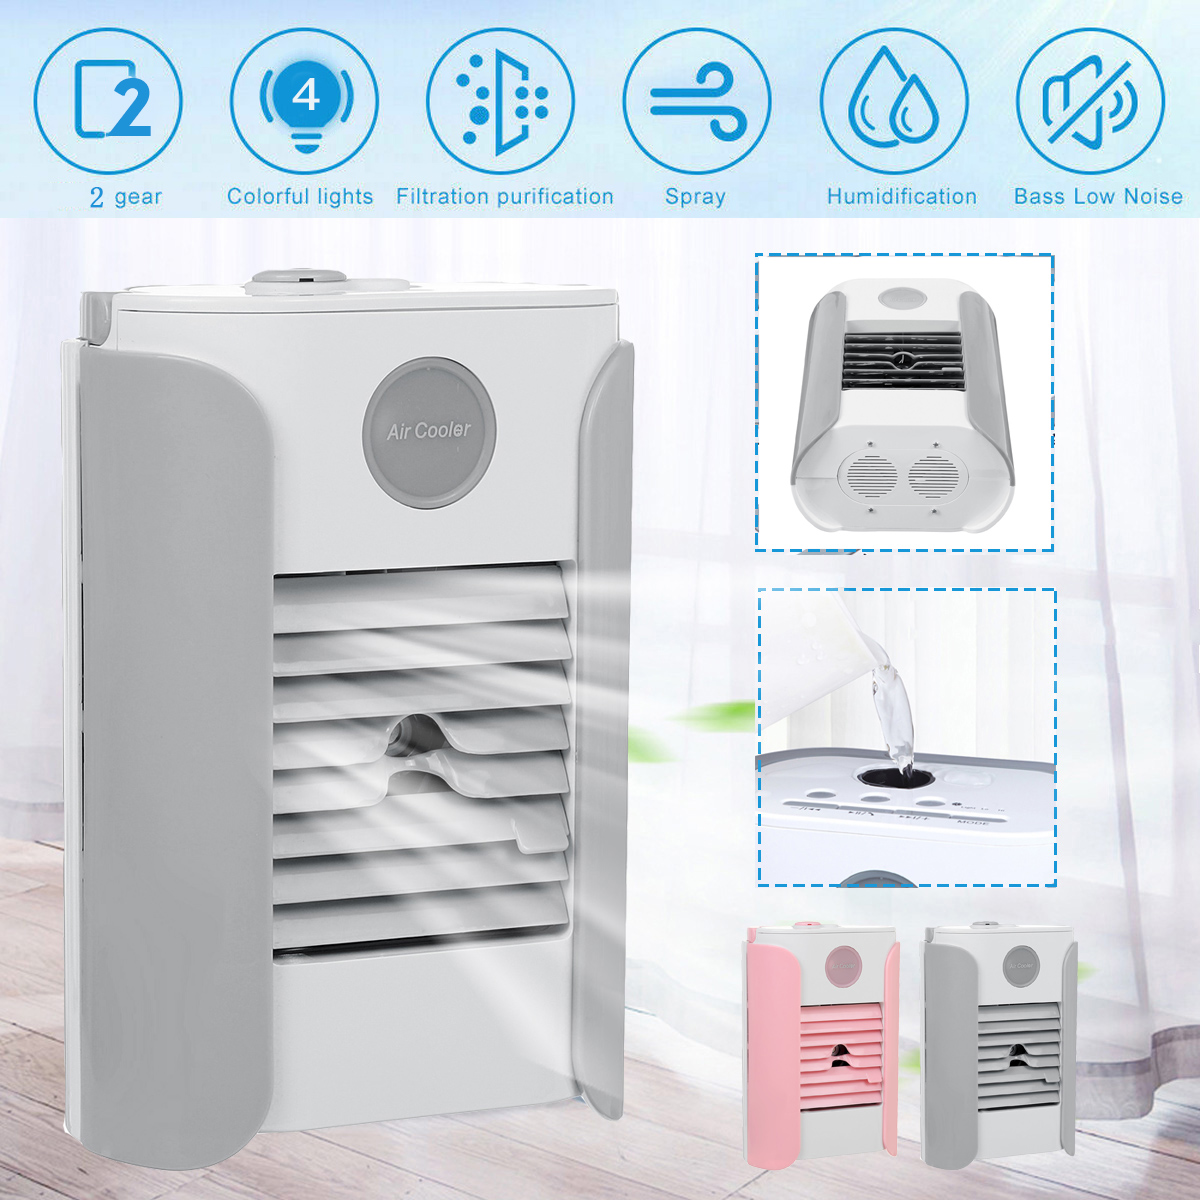 Multifunction-Humidifier-Portable-Air-Cooler-Cool-Conditioner-Conditioning-Fan-1715755-2